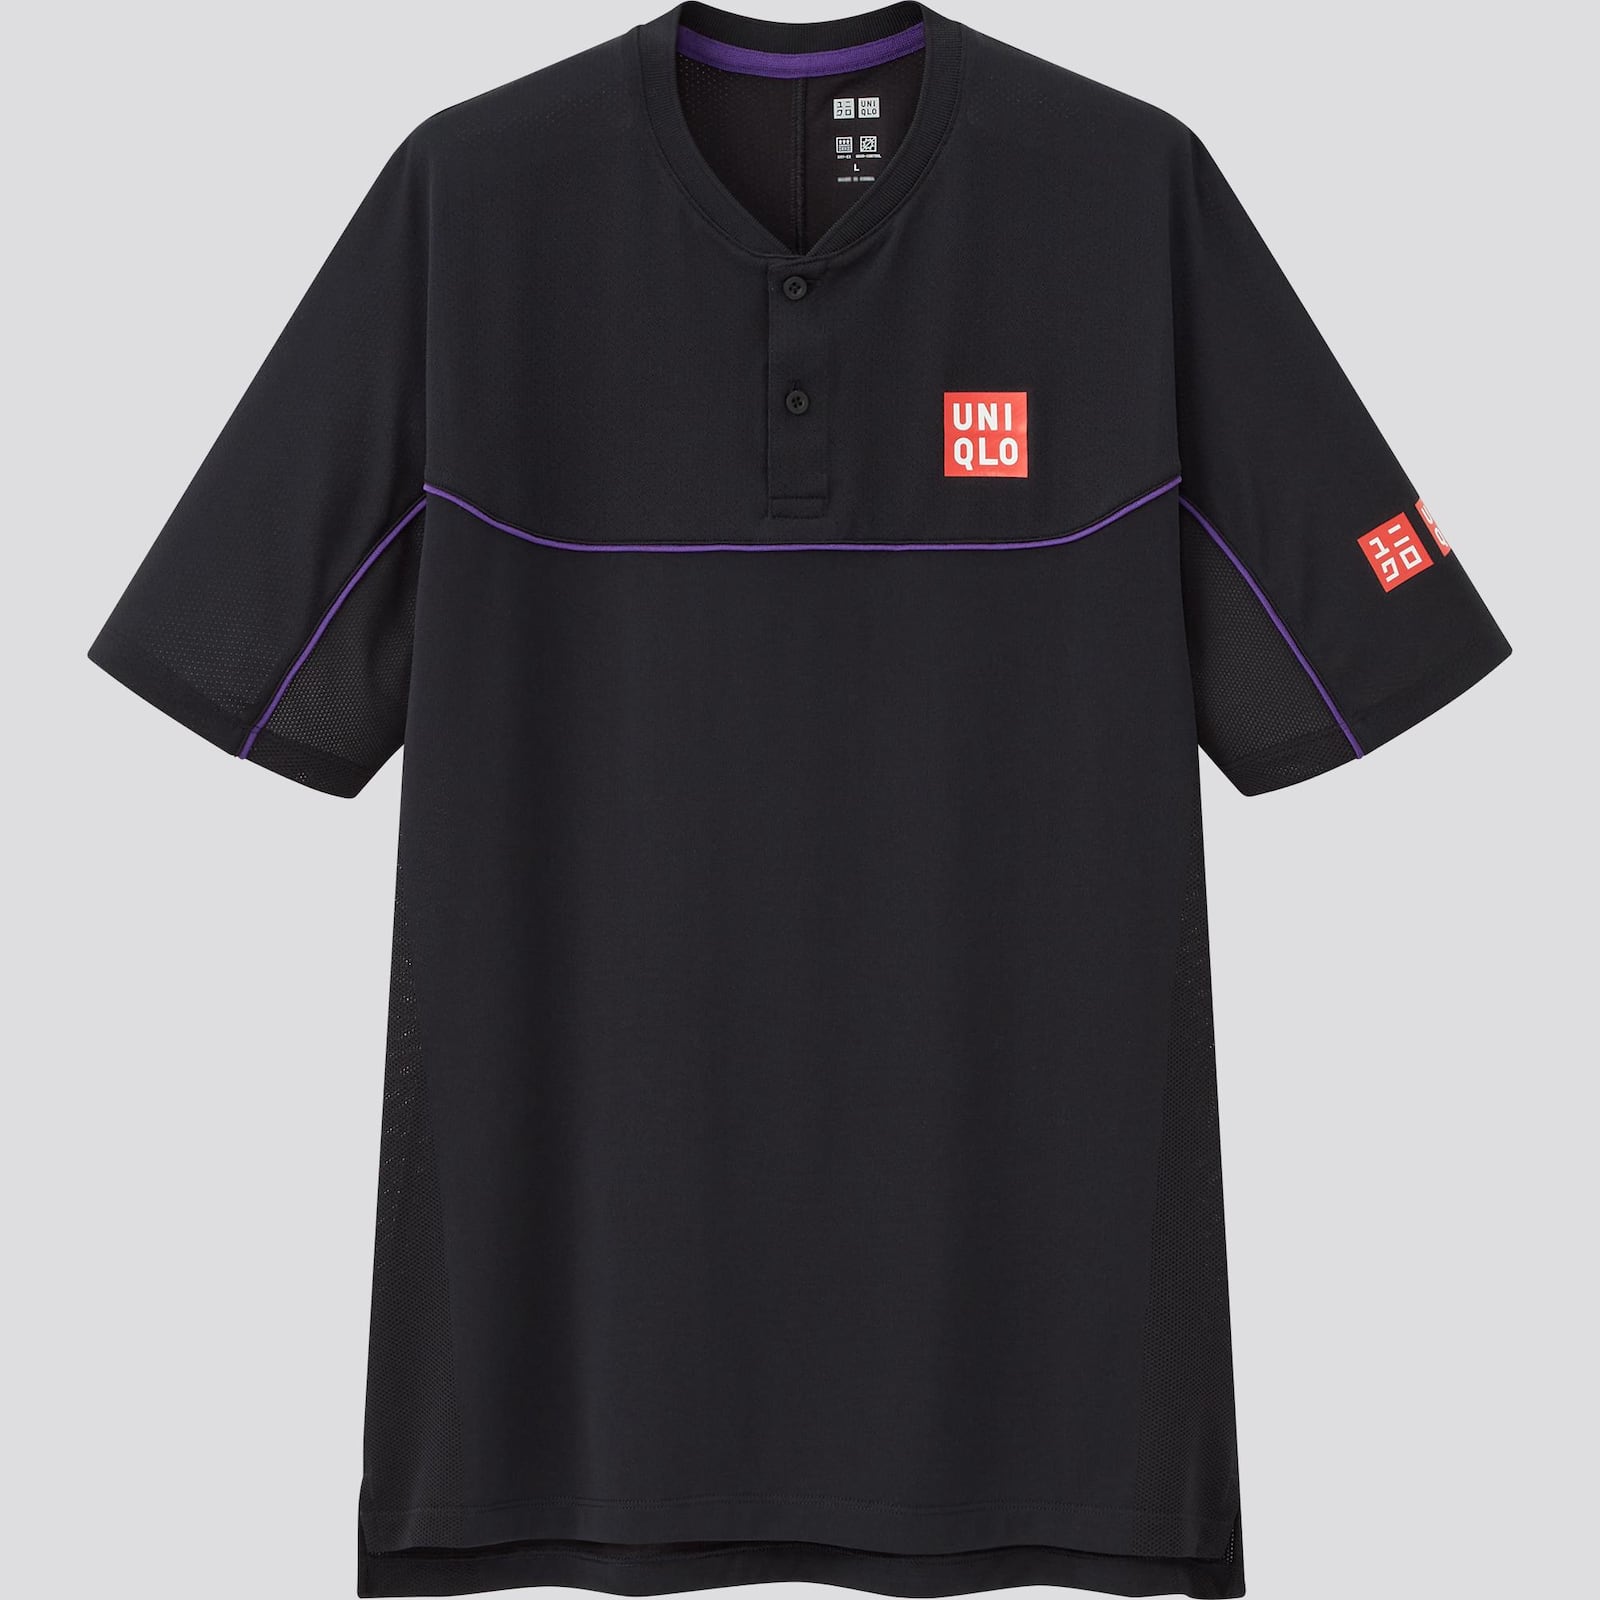 Roger Federers 5Piece Uniqlo Tennis Outfit Is on Sale for 120